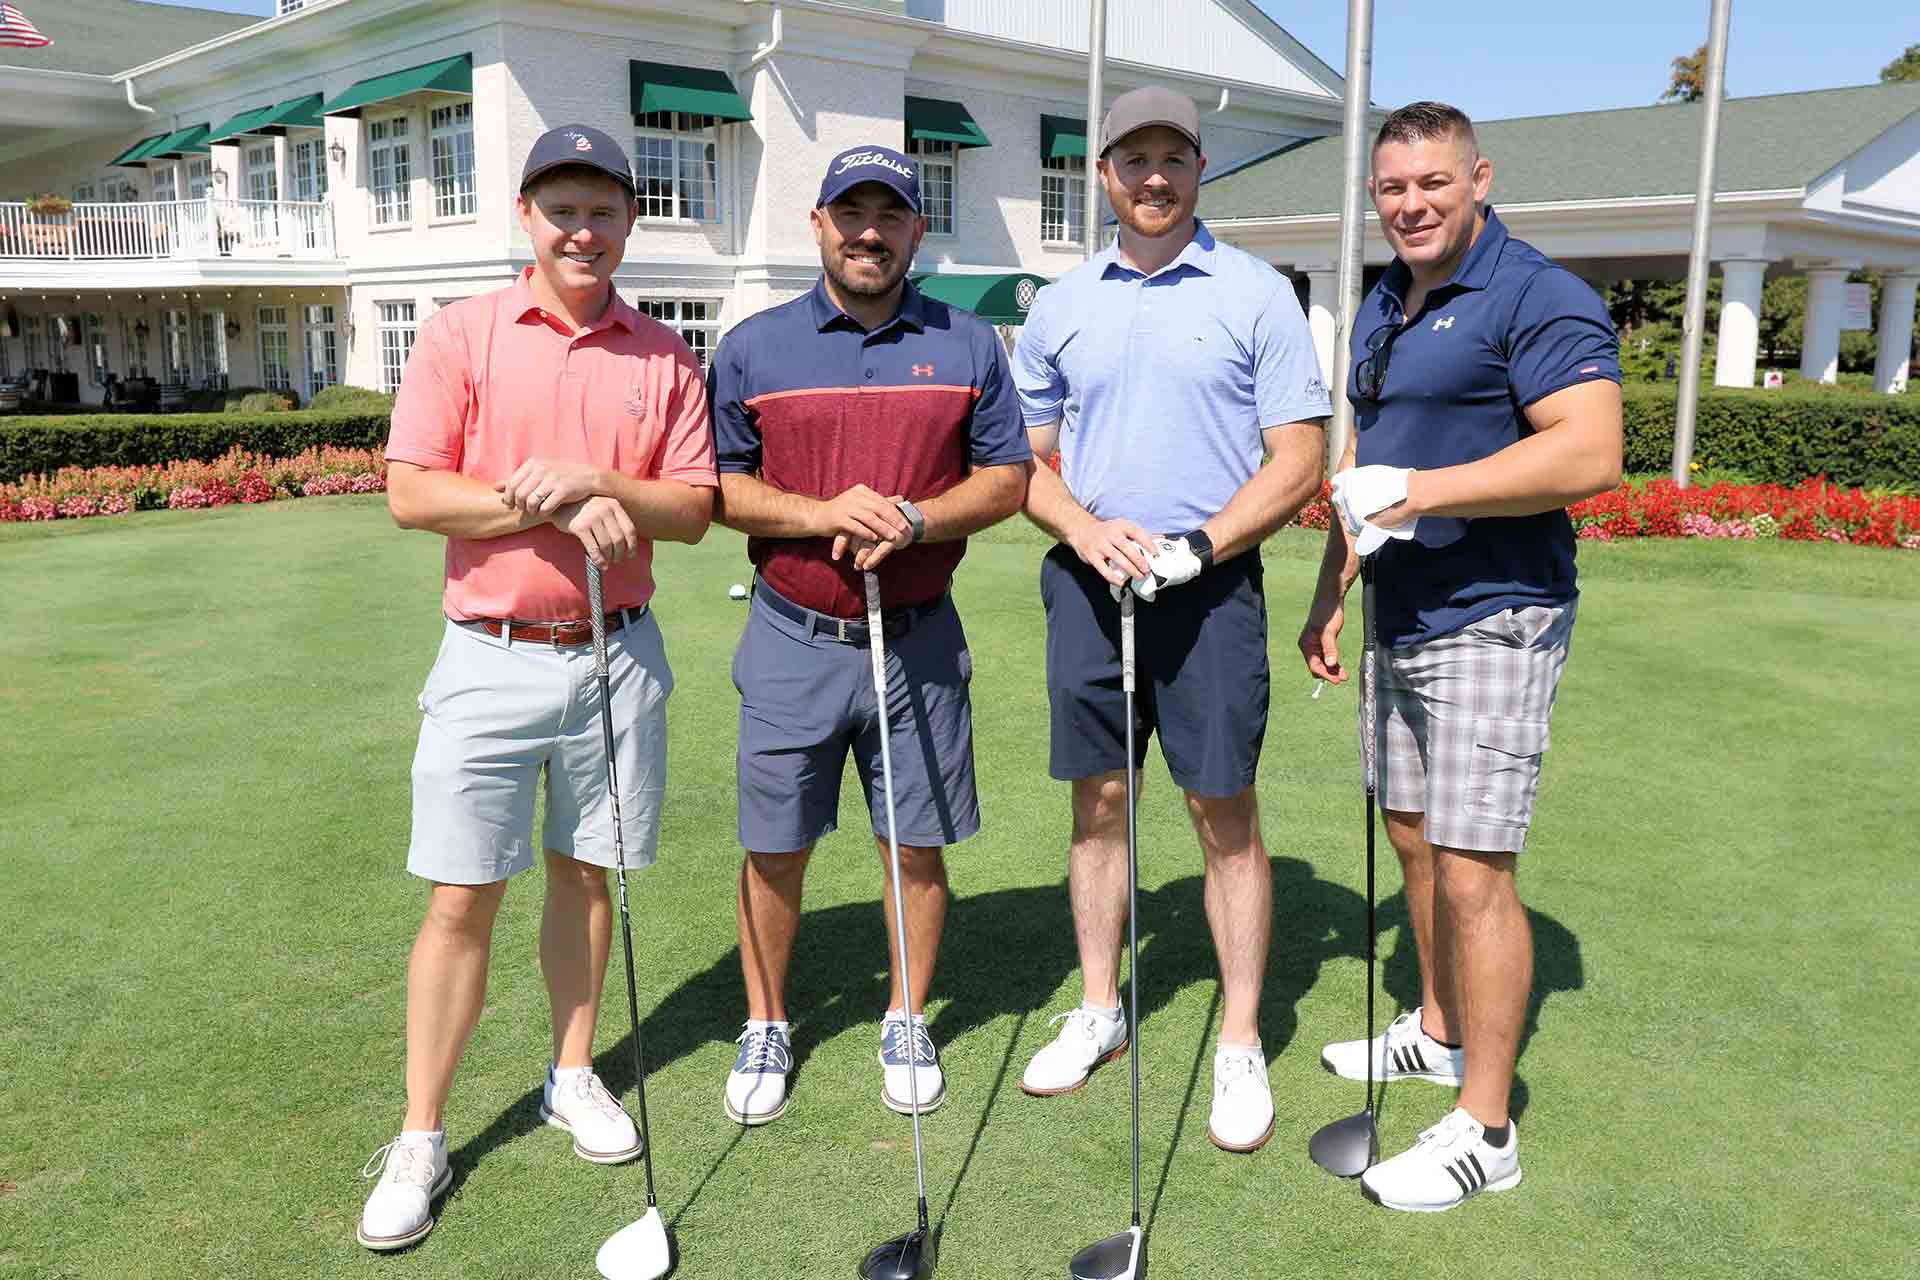 2021-endowment-classic-four-people-posing-together-with-clubs